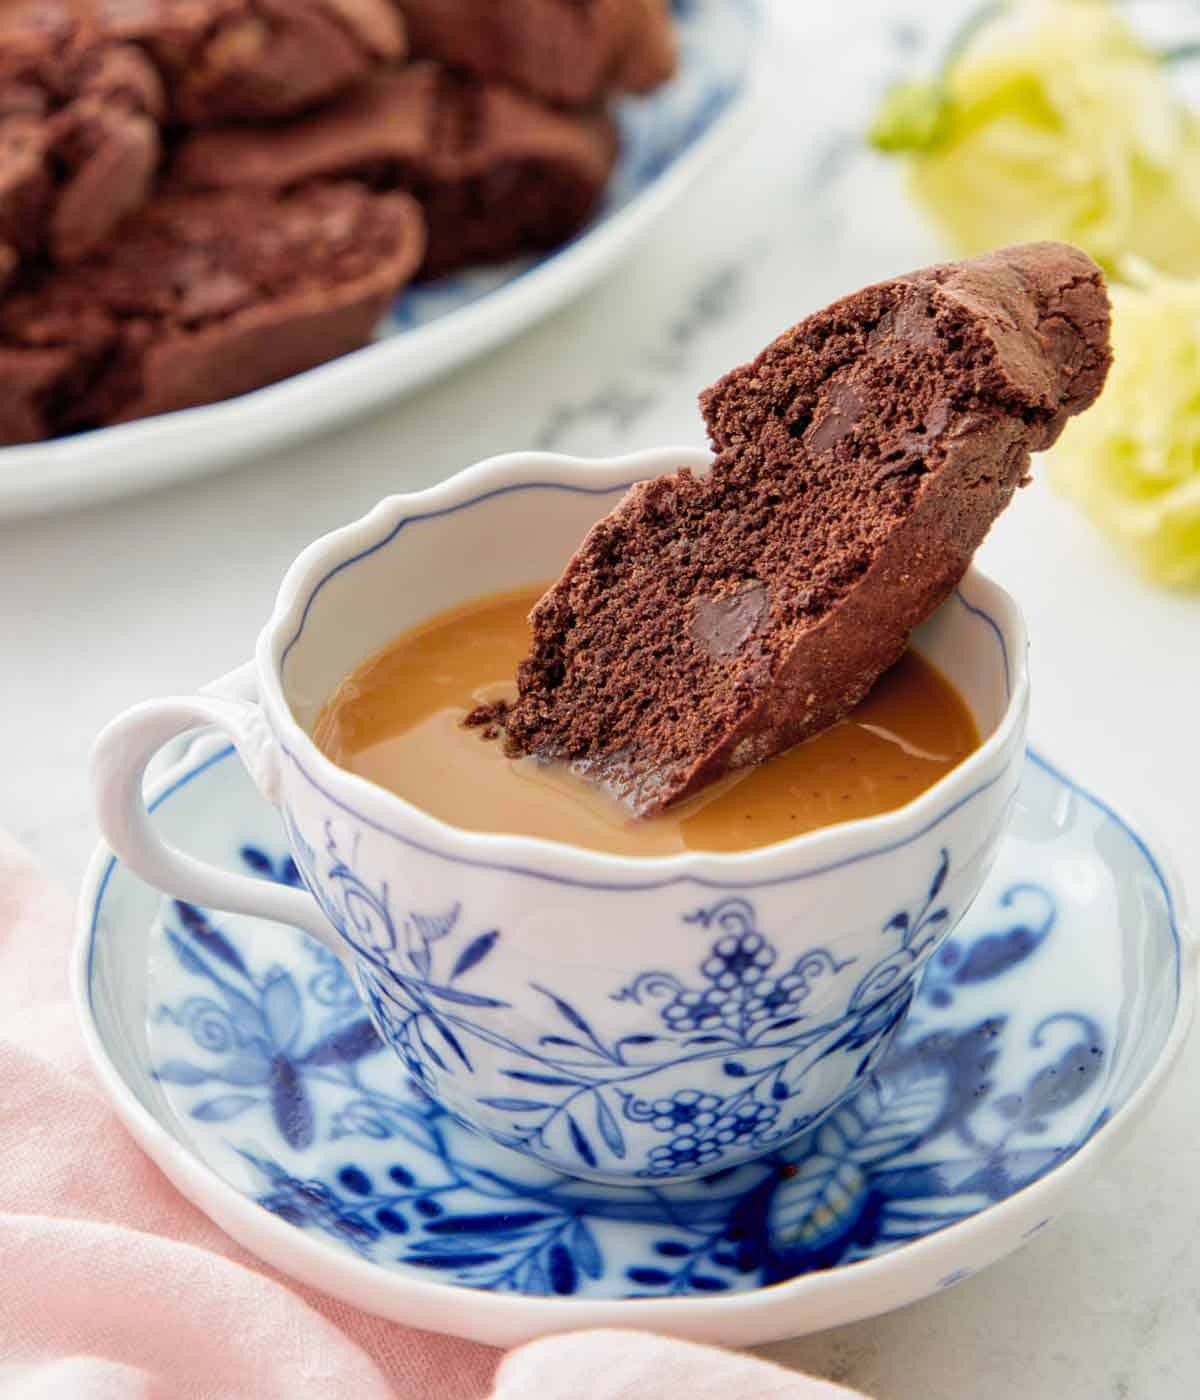 A chocolate biscotti dipped into a cup of coffee.